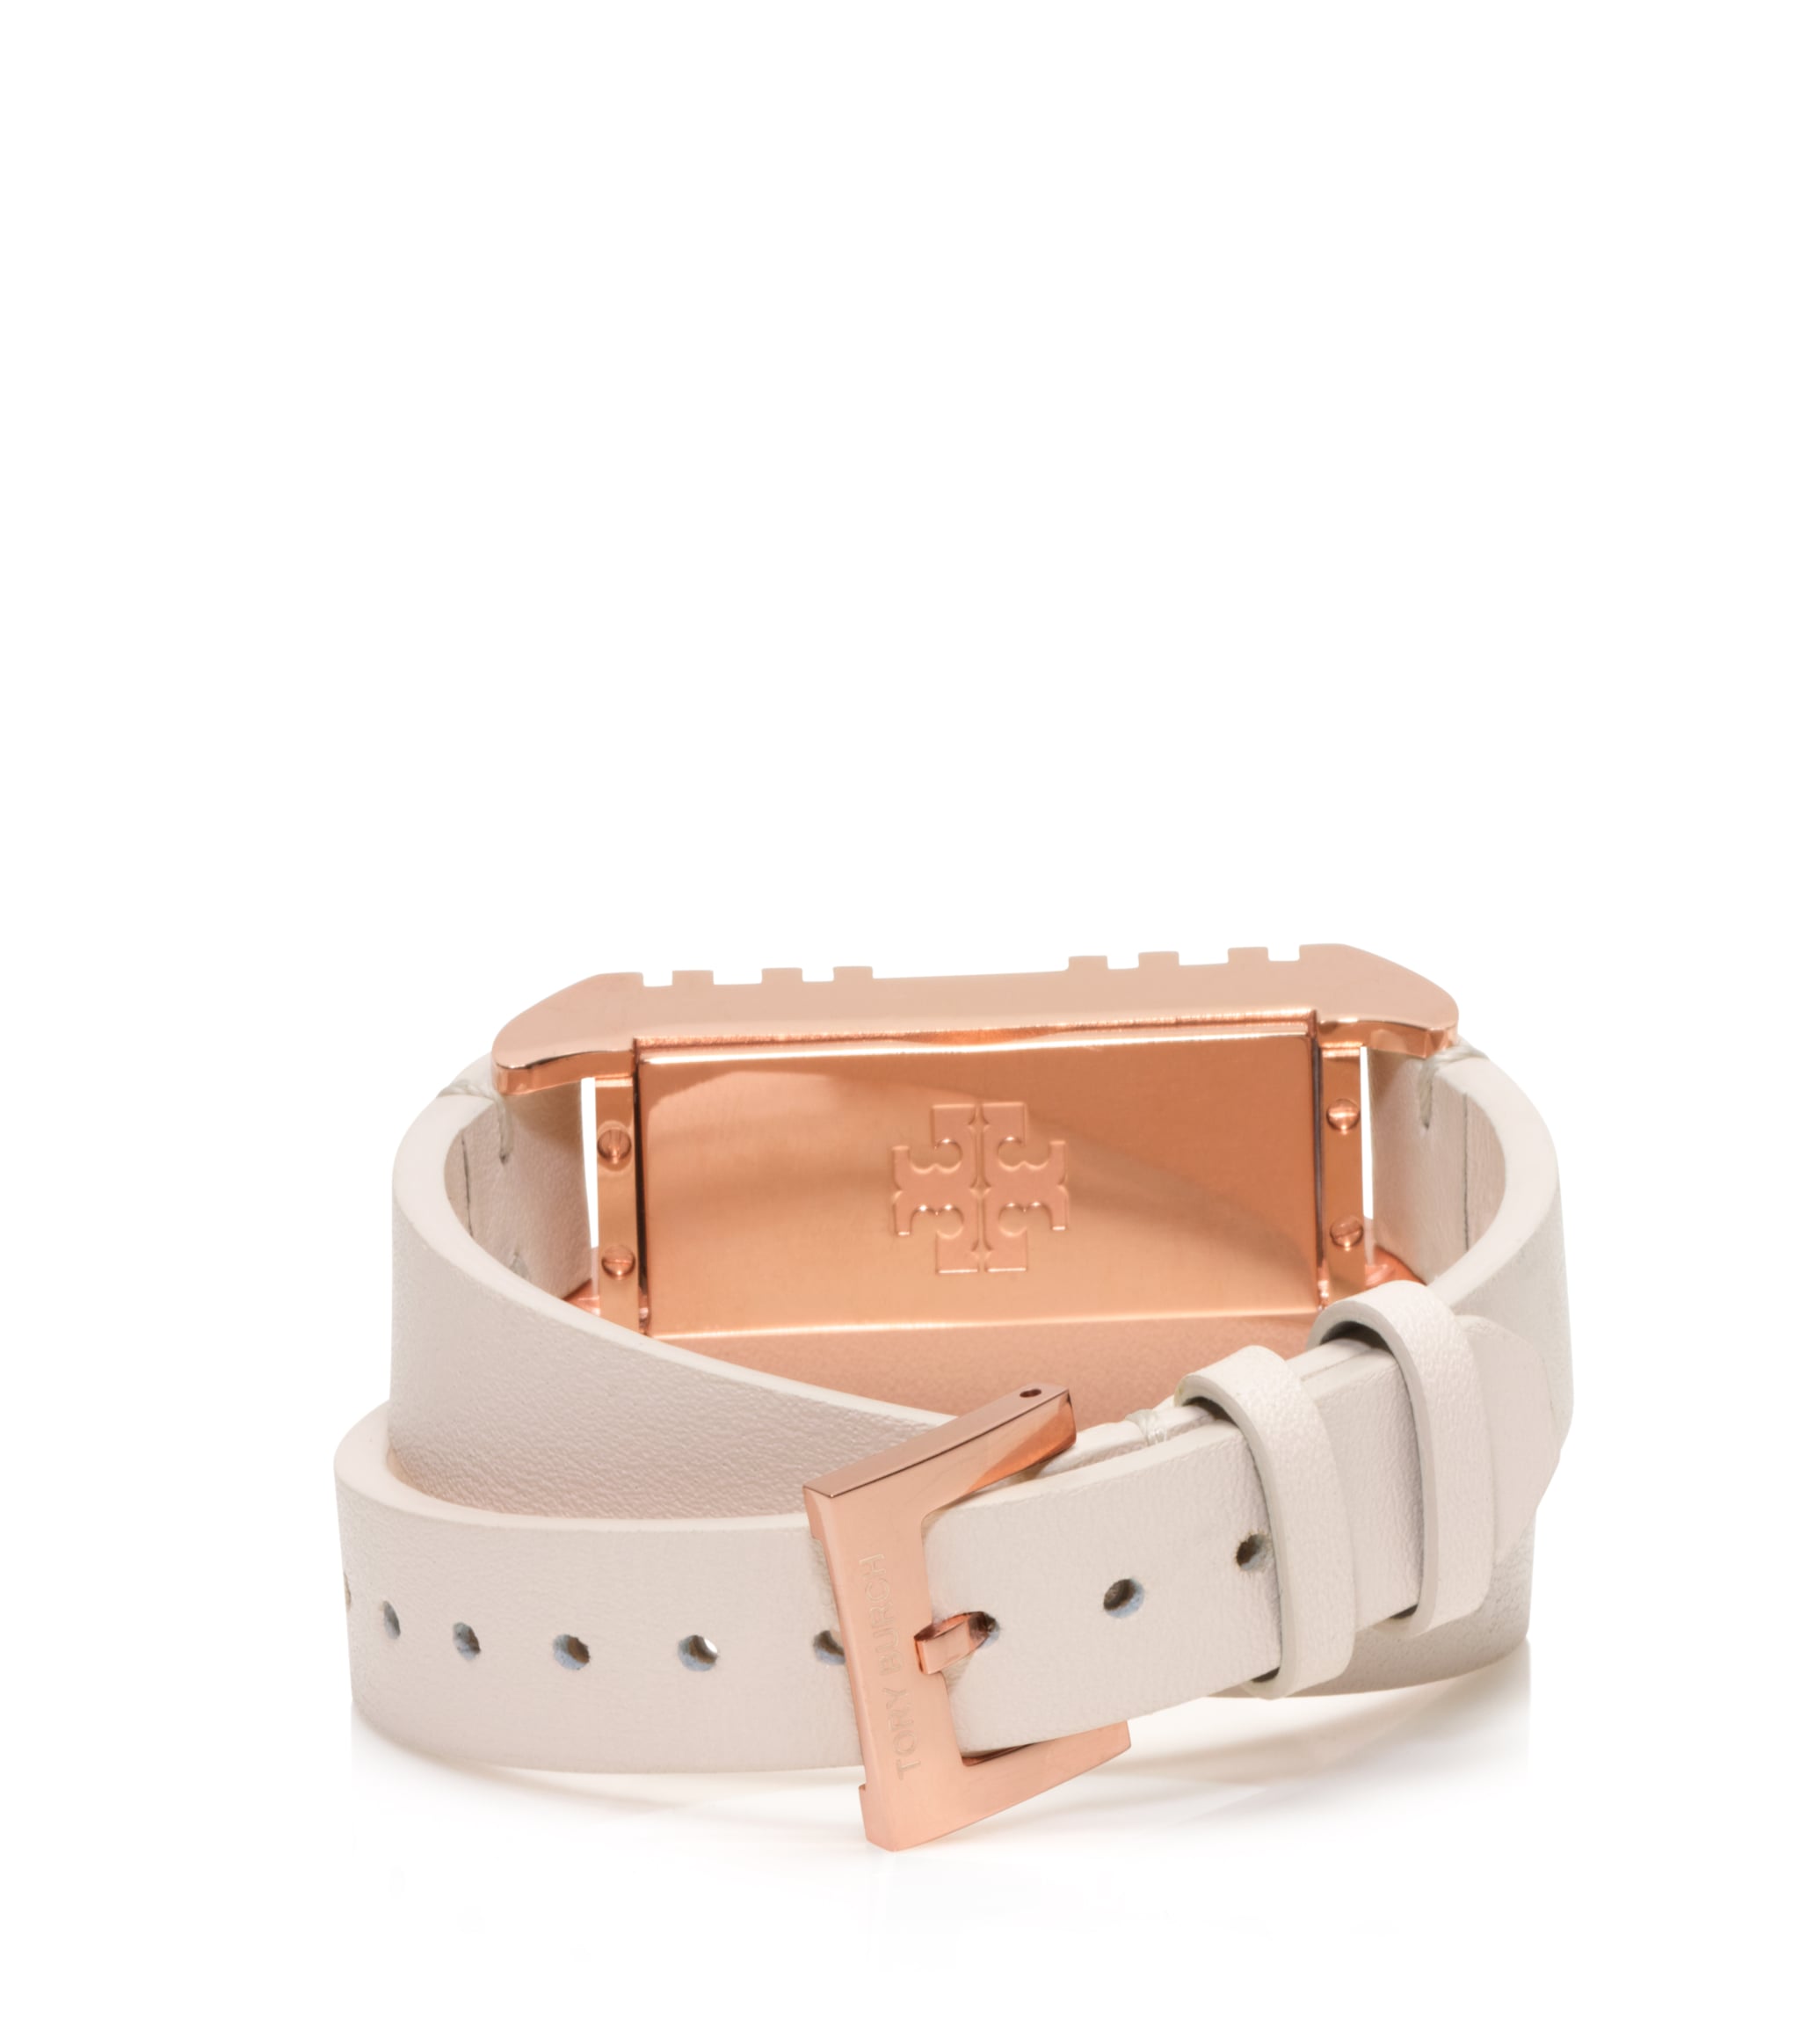 Tory Burch For Fitbit Fret Double-Wrap Bracelet in Light Oak/Rose | Tory  Burch and Fitbit Just Released Their Chicest Collaboration Yet | POPSUGAR  Fitness Photo 5